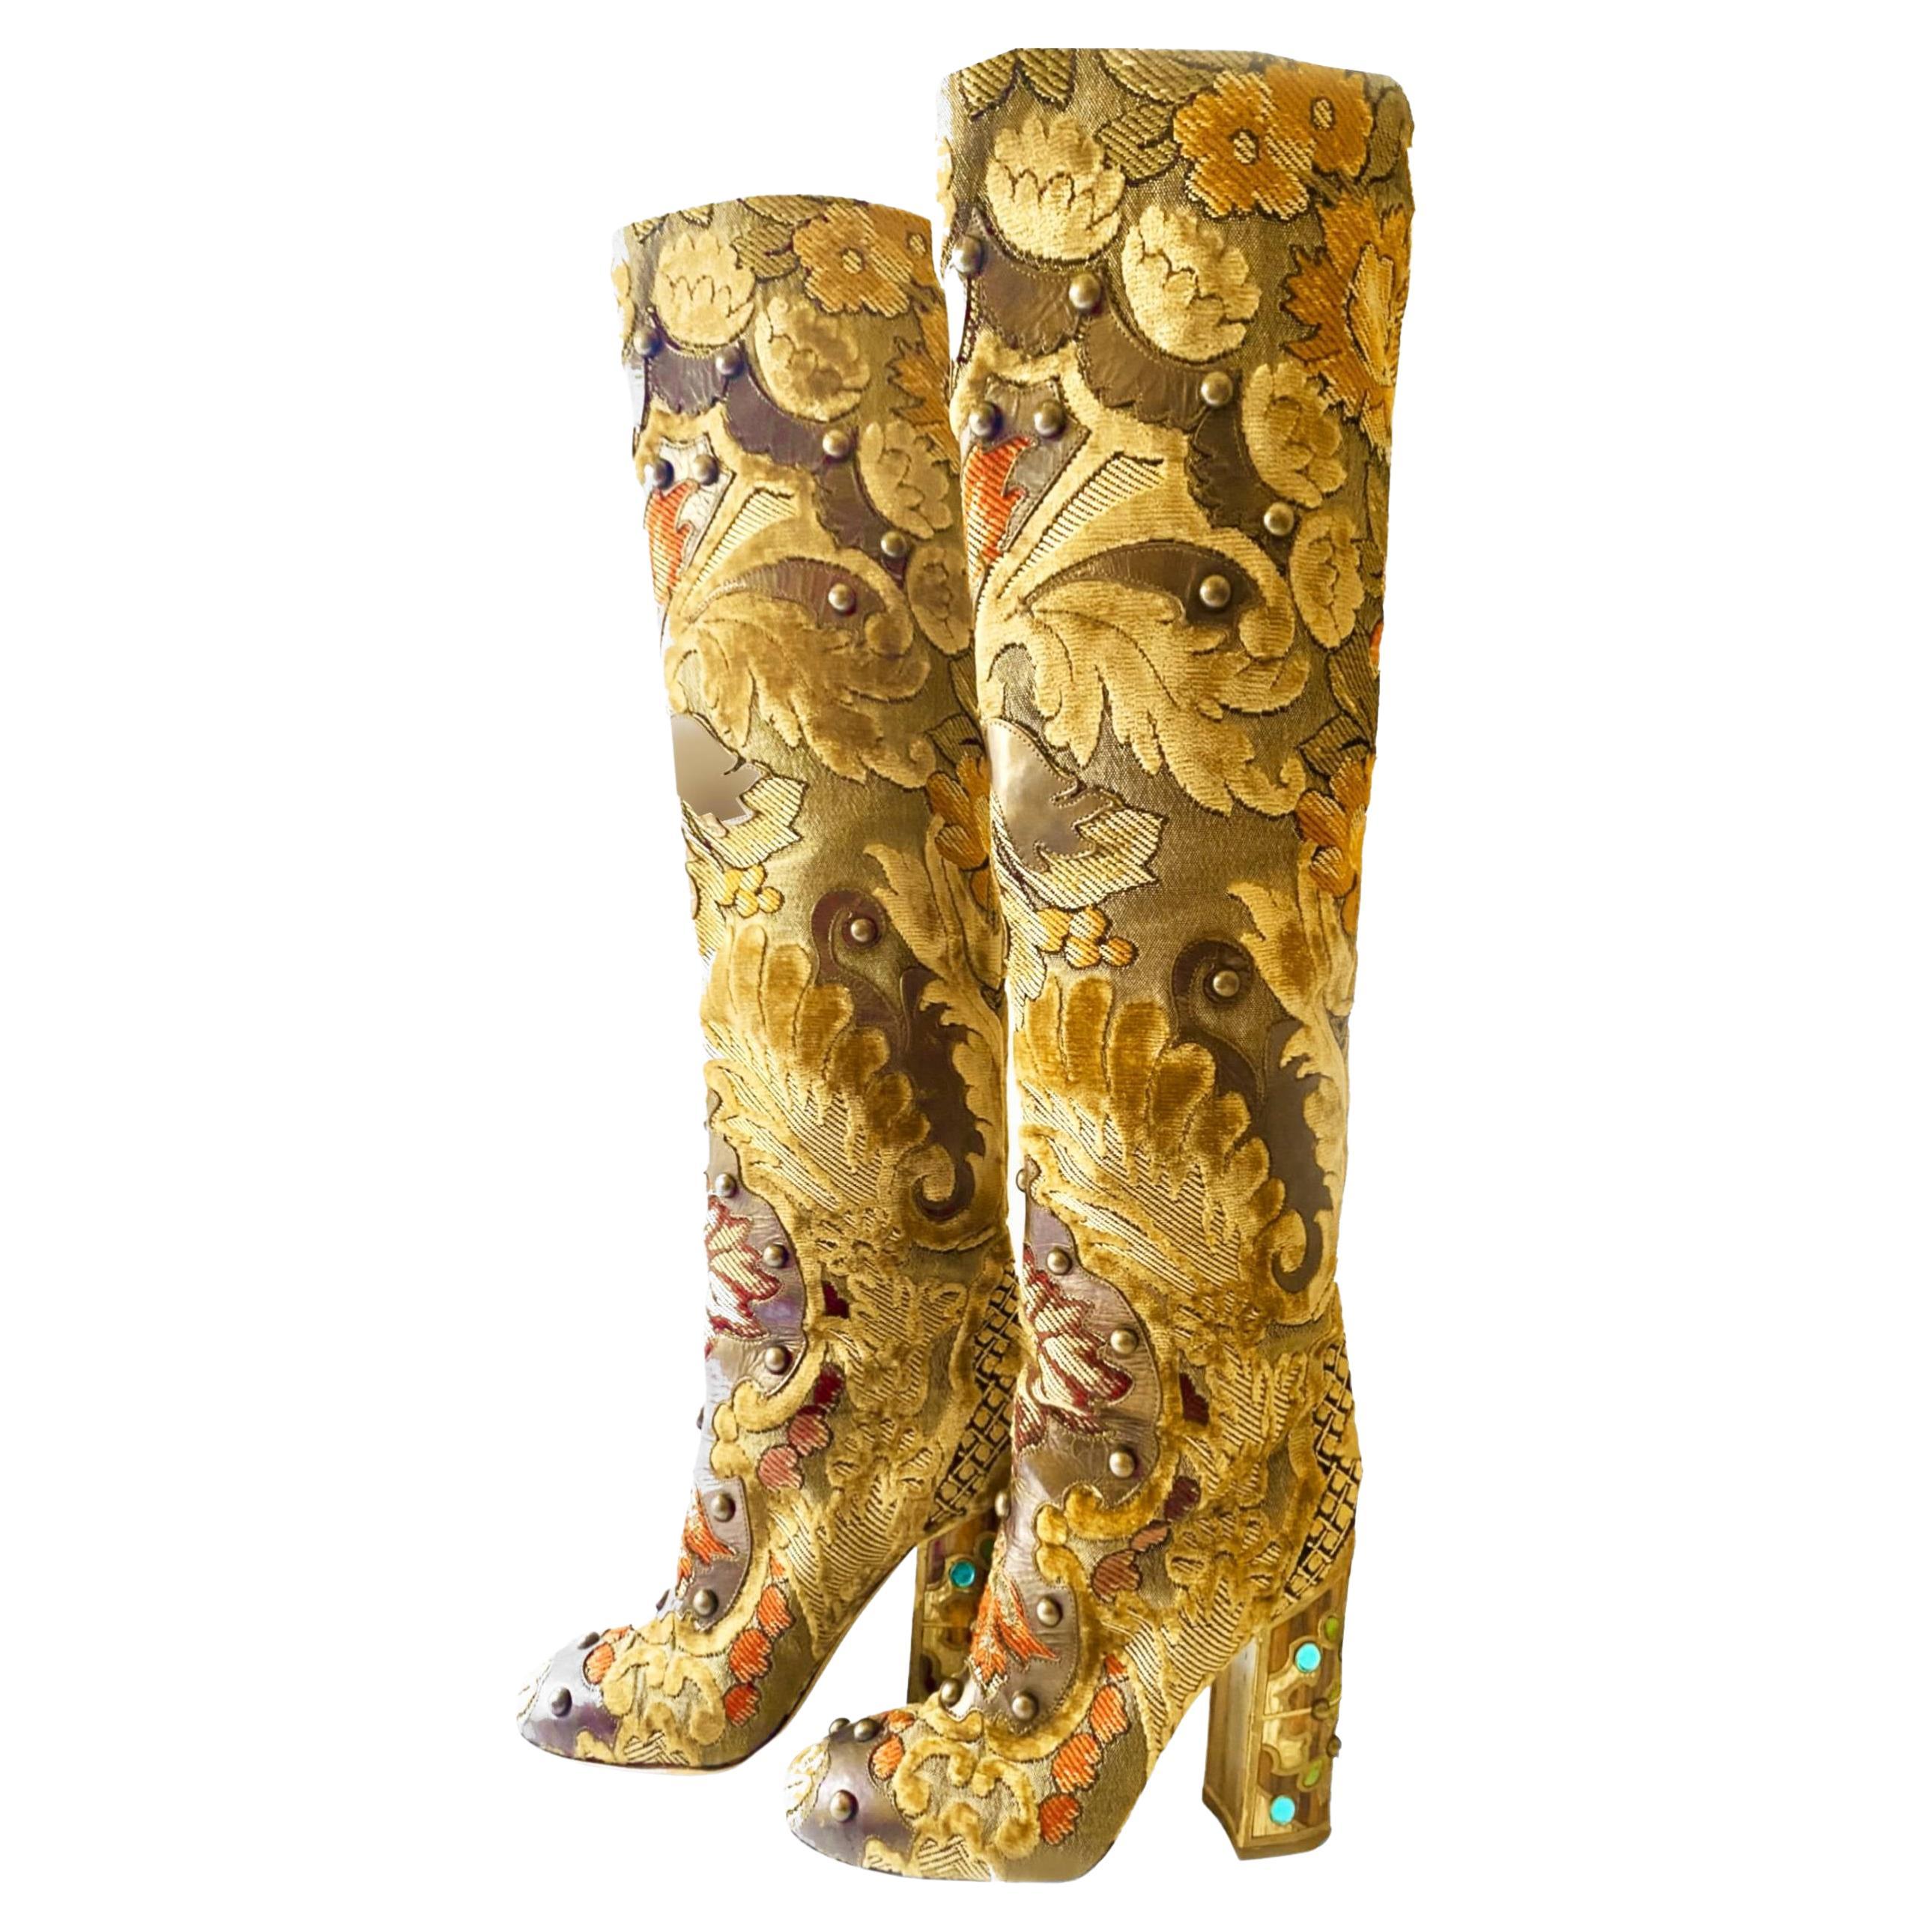 Dolce & Gabbana's Multicolor Brocade Fabric Over The Knee Boots boast a striking combination of beige velvet, brown leather, and intricate embellishments like stones and studs. The heel is adorned with artisanal wooden details, atop a leather